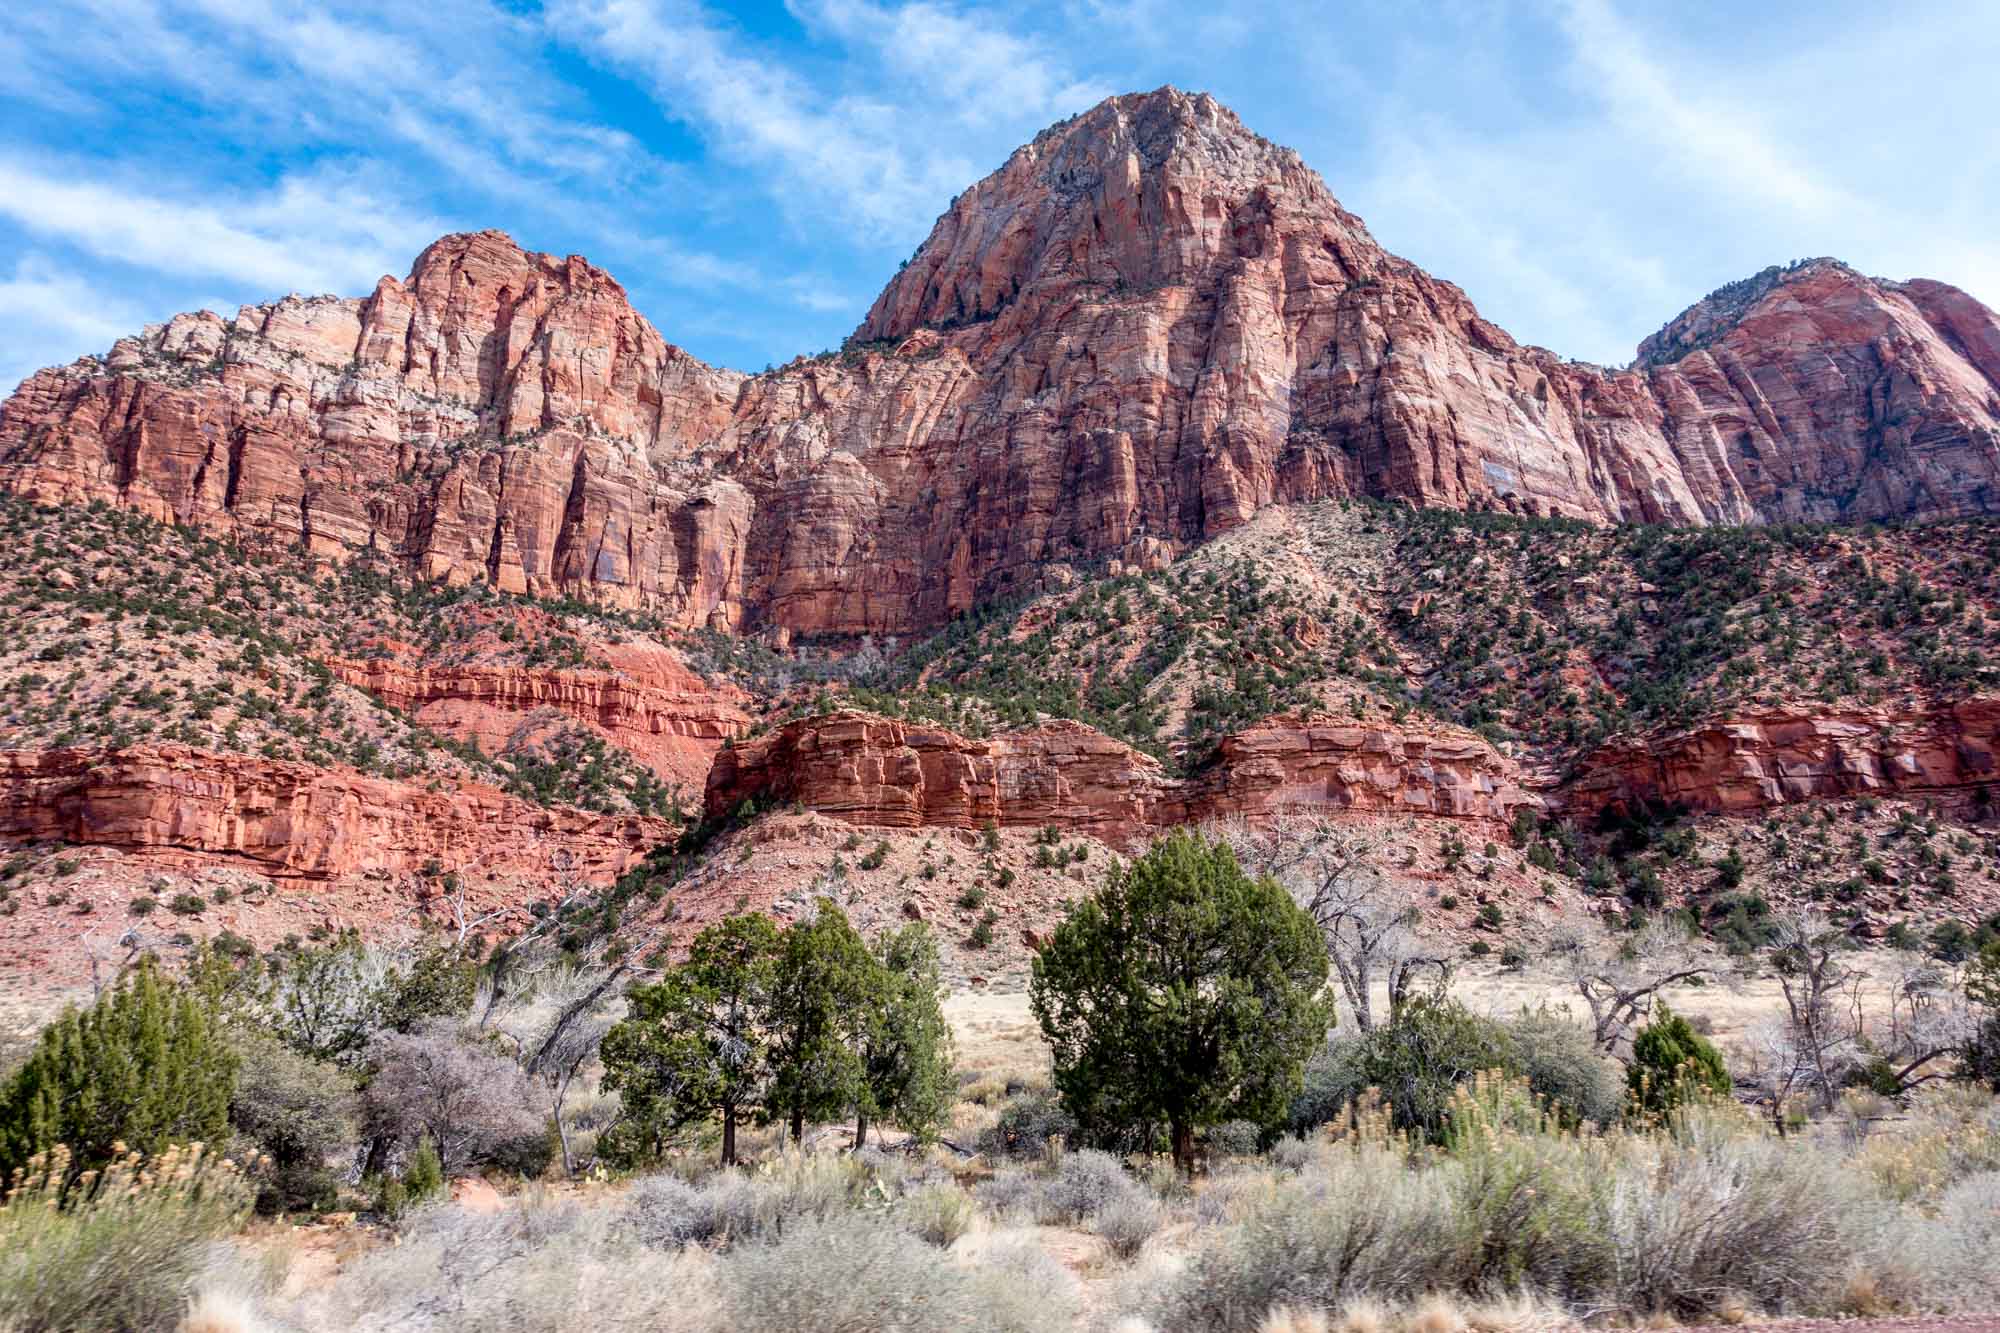 Red rock cliffs on side of mountain